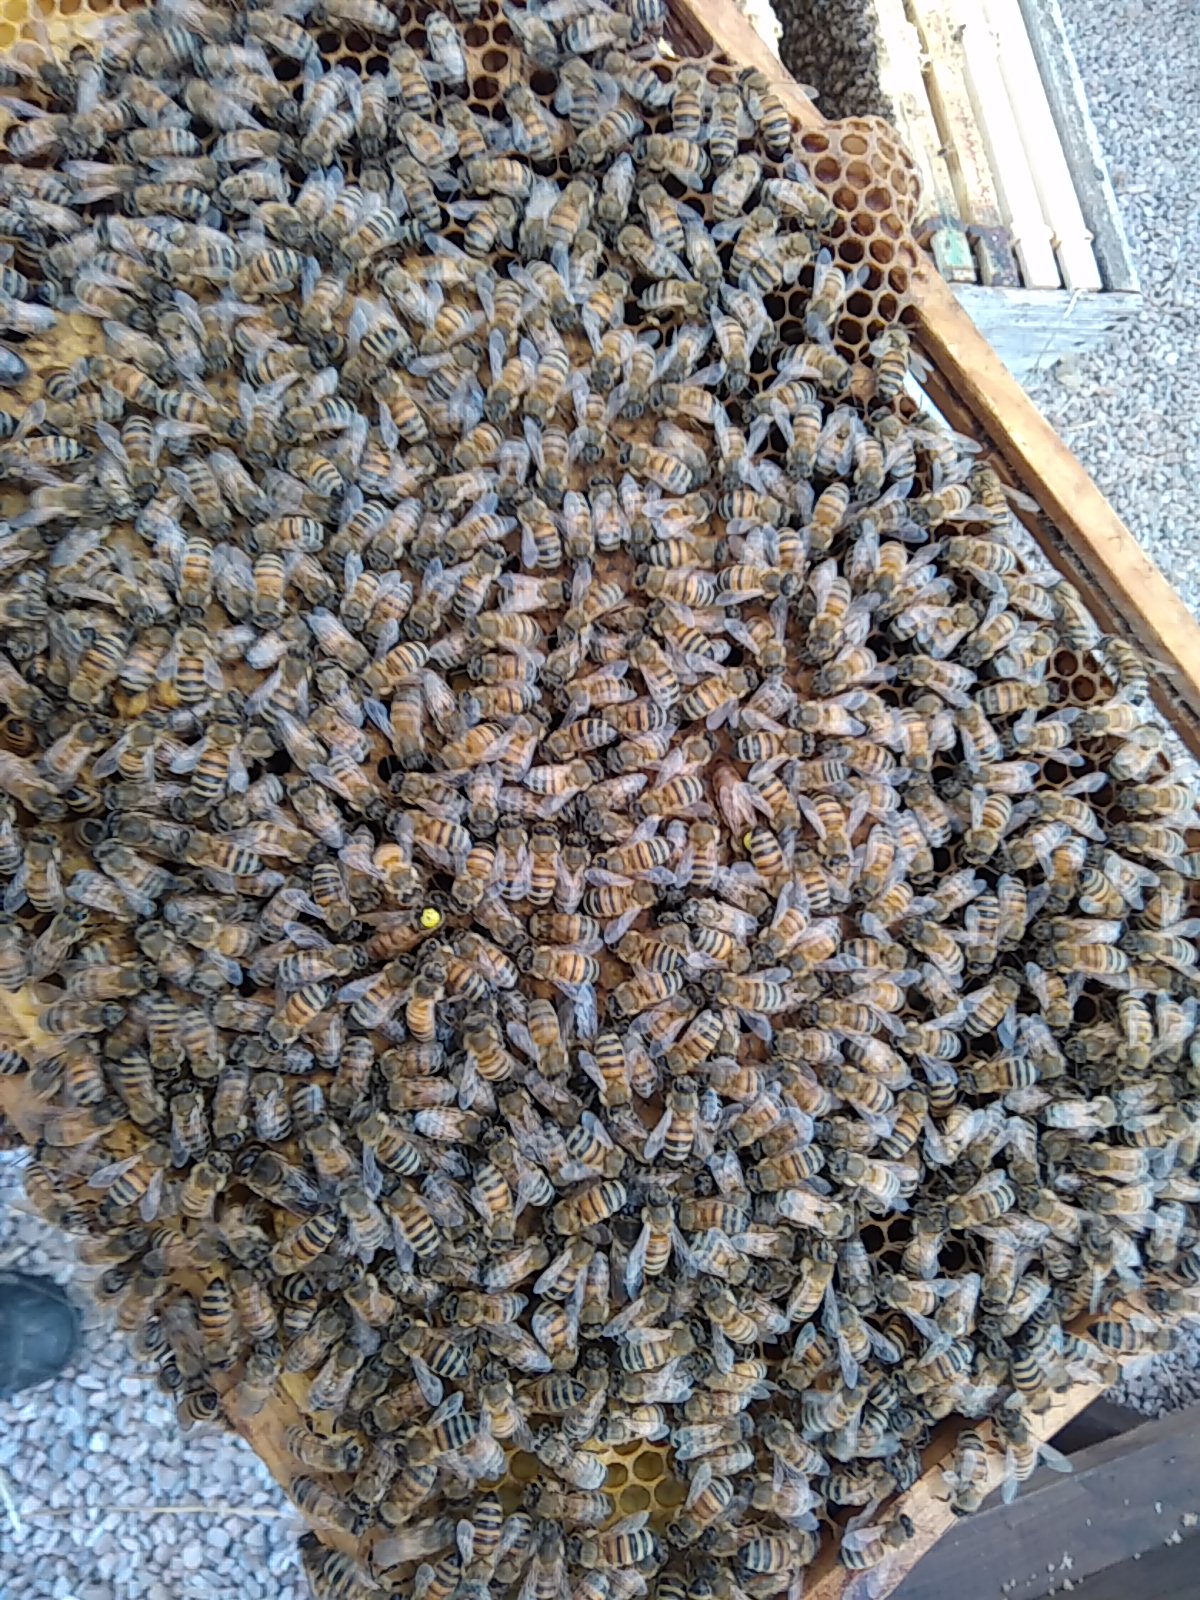 Frame of Bees from Open Mated queen